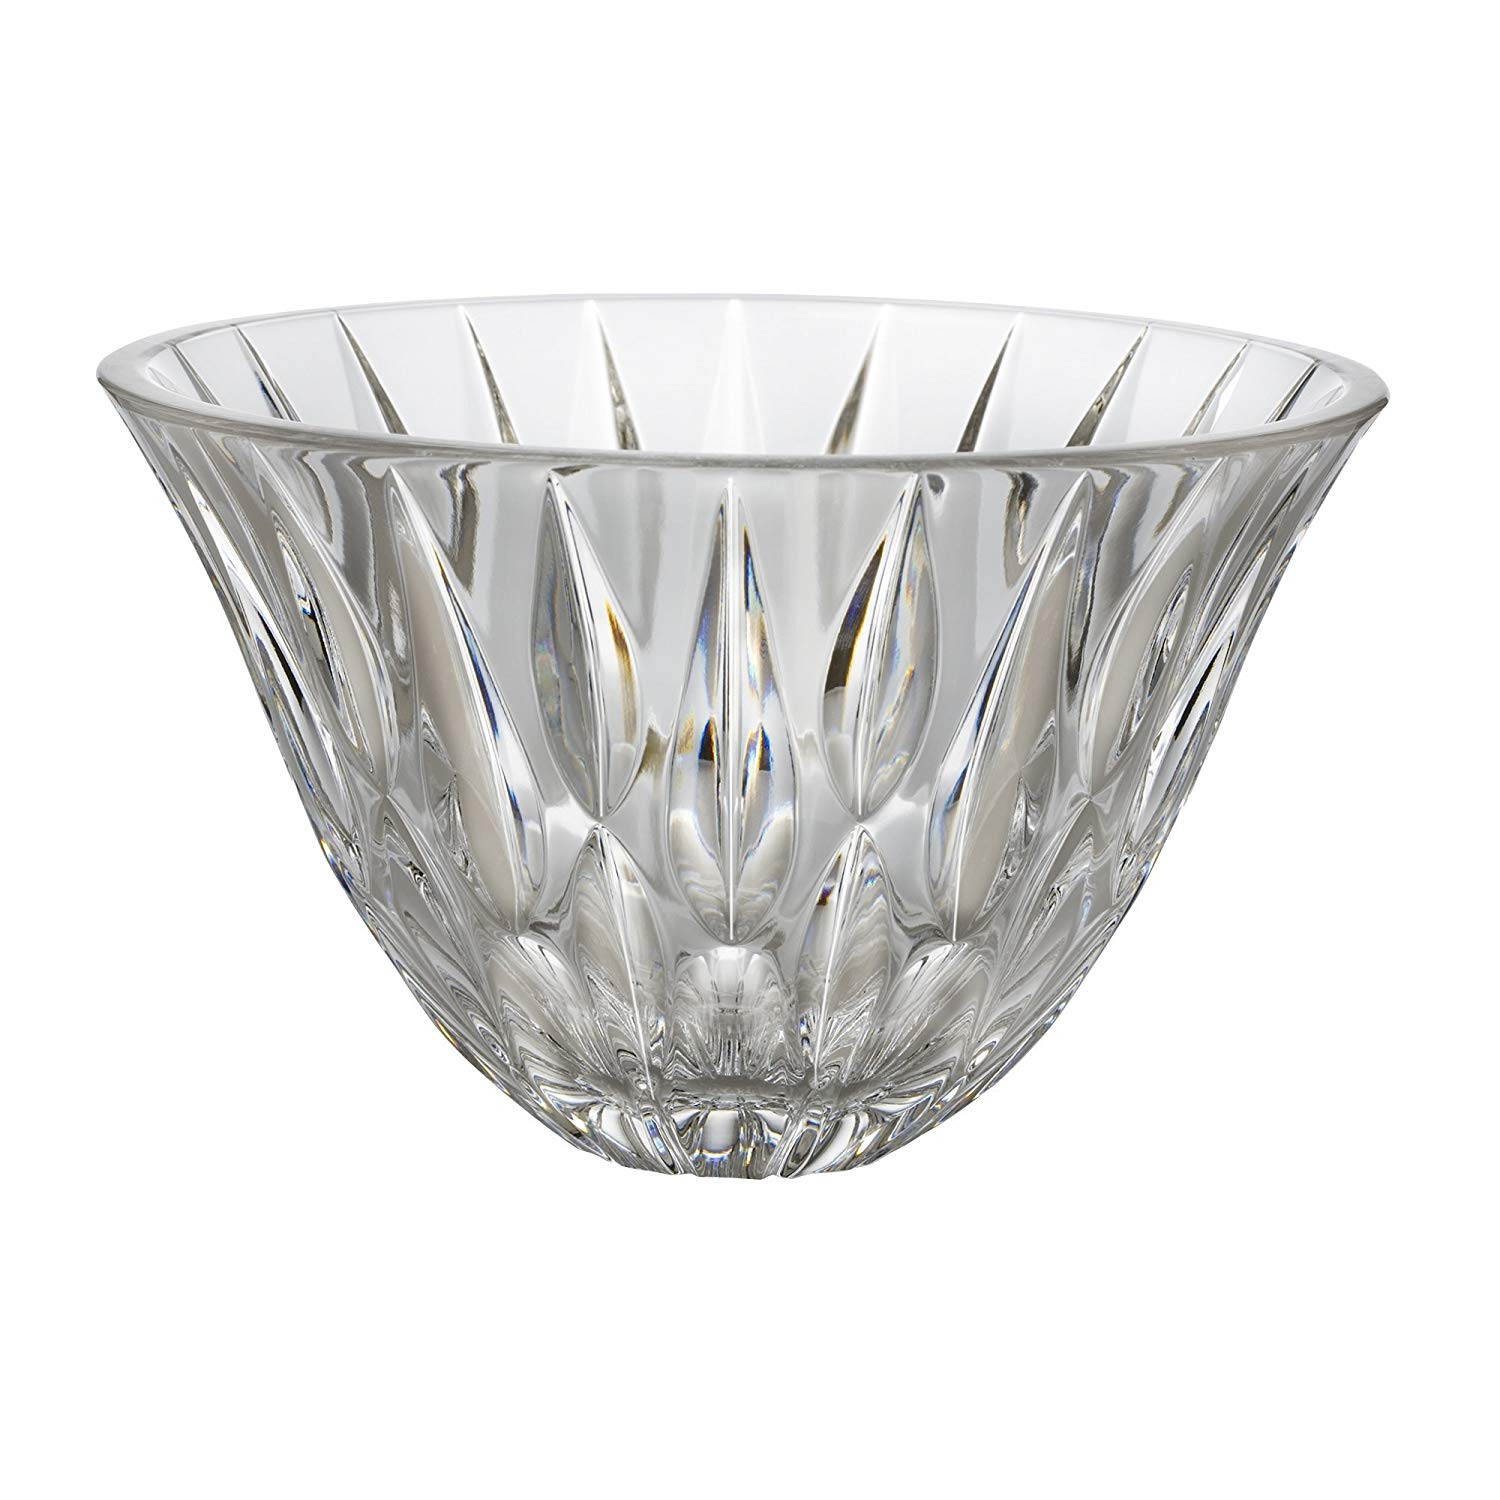 22 Lovable Marquis by Waterford Markham Vase 9 2024 free download marquis by waterford markham vase 9 of amazon com marquisa by waterford rainfall 8 bowl decorative bowls in amazon com marquisa by waterford rainfall 8 bowl decorative bowls kitchen dining